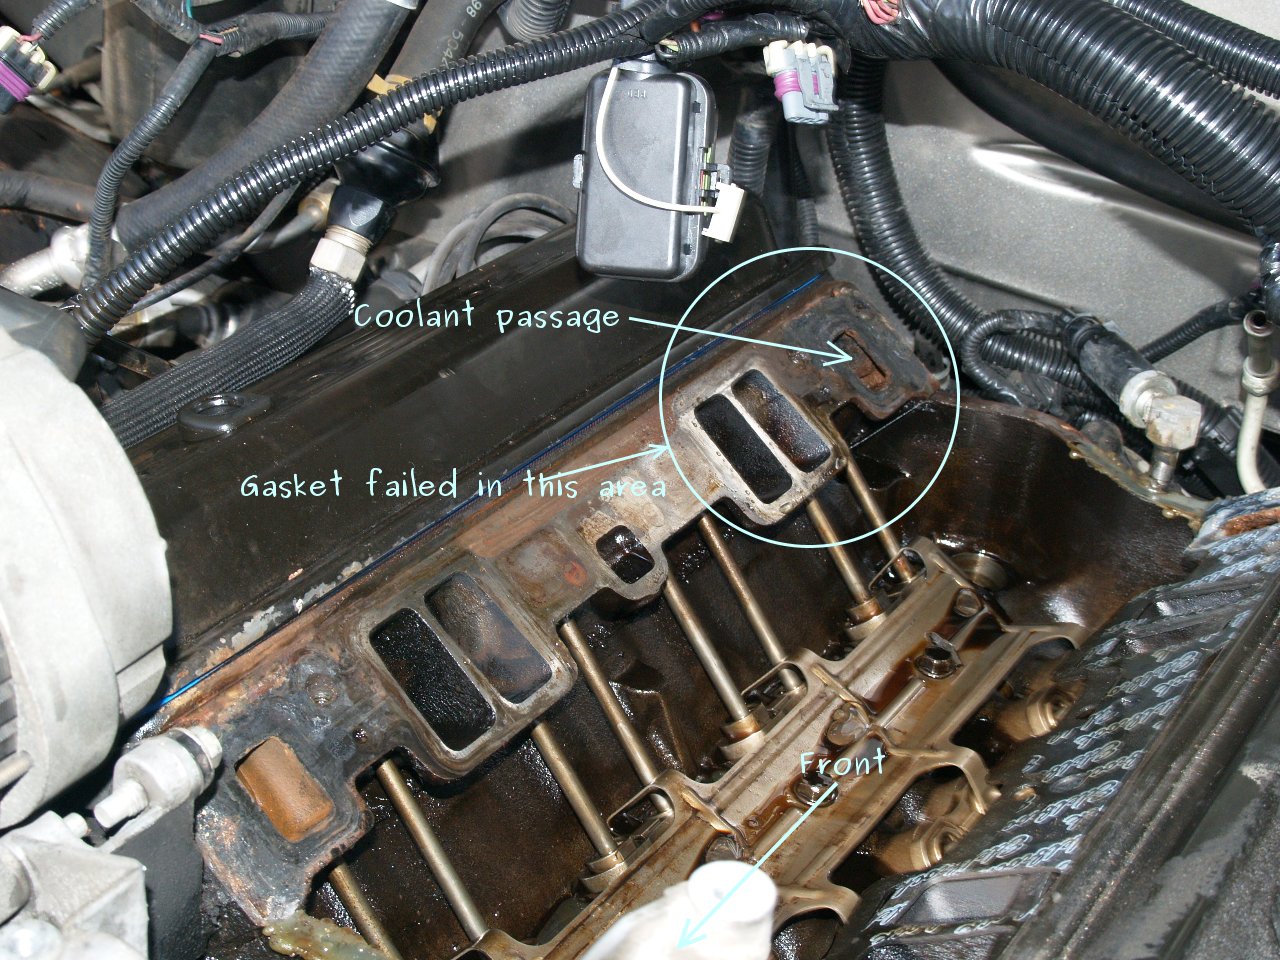 See P22CC in engine